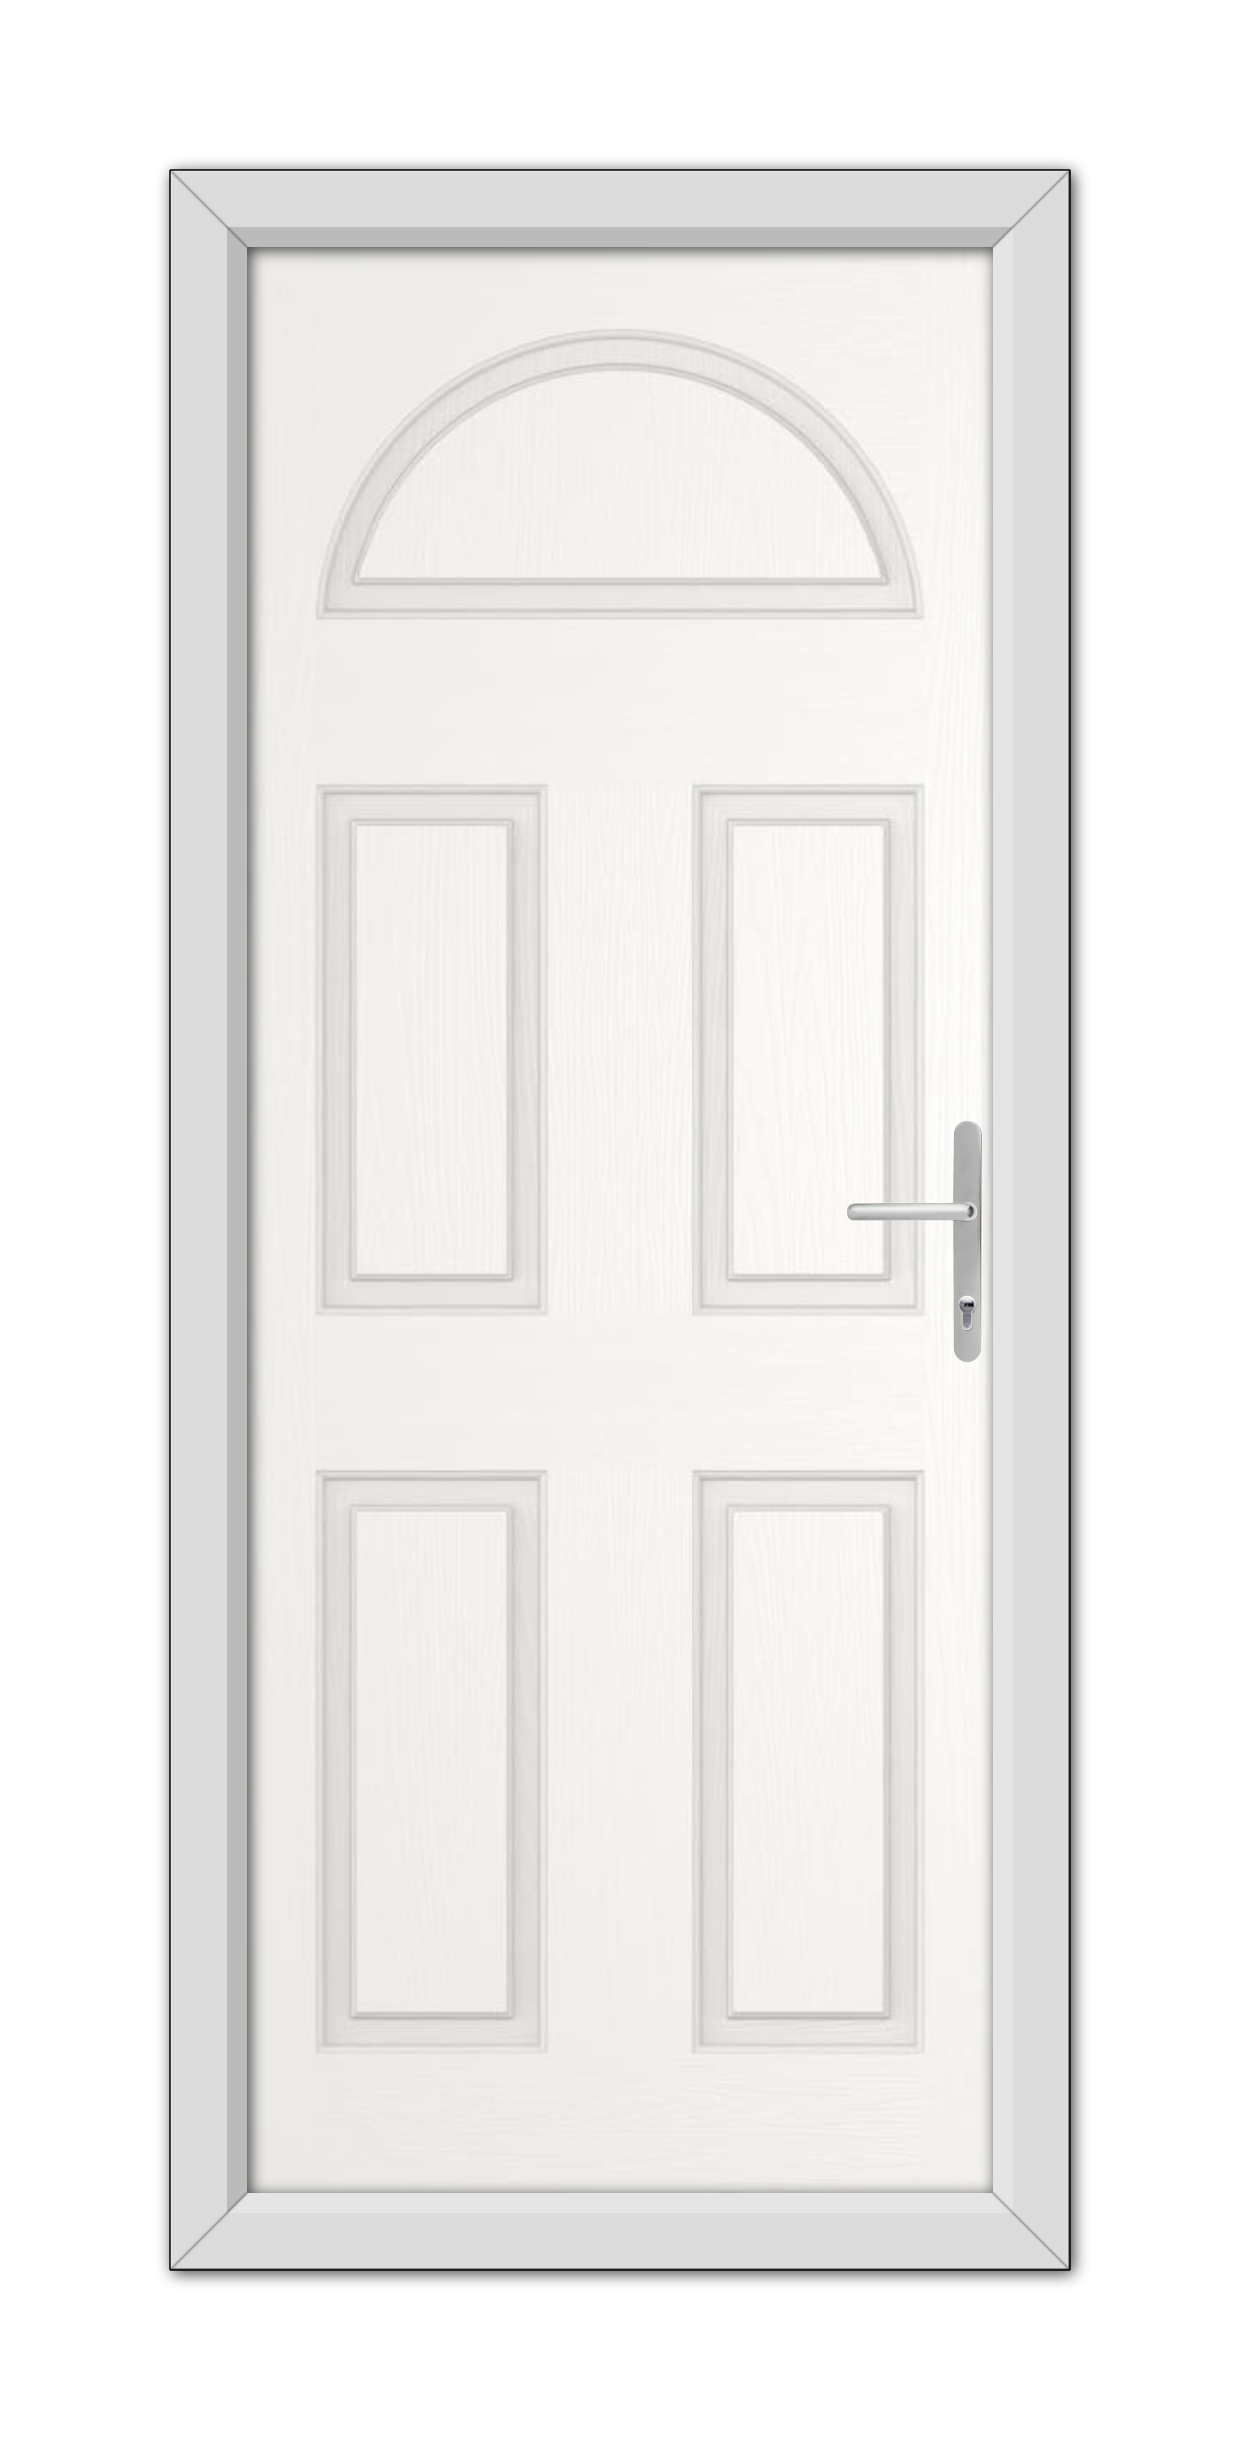 A White Winslow Solid Composite Door 48mm Timber Core featuring a semi-circular window at the top and six recessed panels, with a metallic handle on the right side, all set within a simple frame.